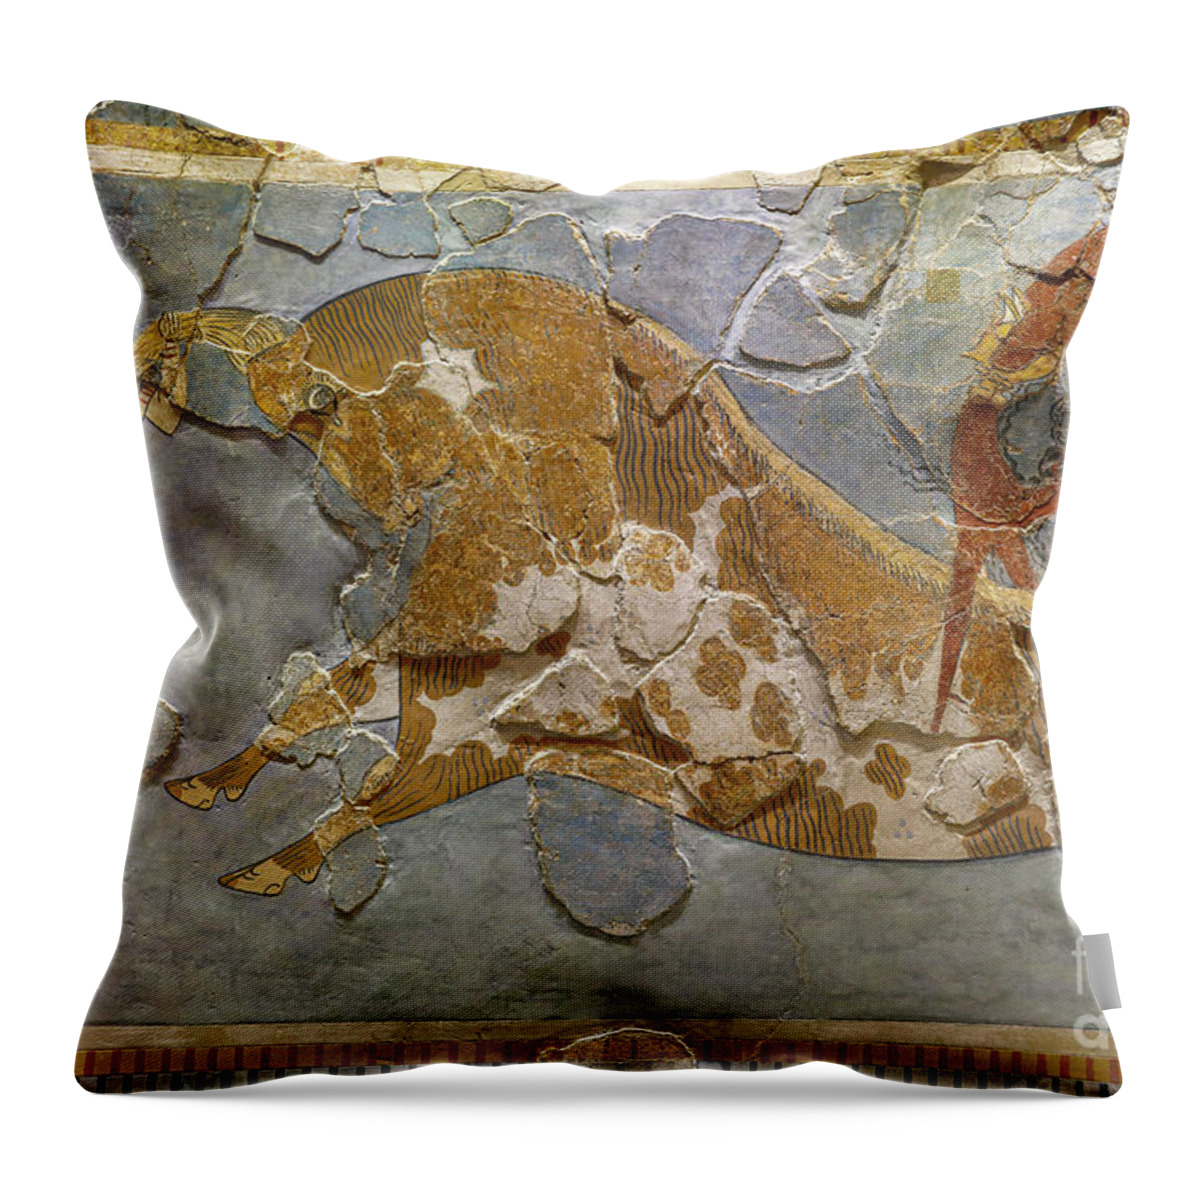 Acrobat Throw Pillow featuring the painting Detail Of The Bull Leaping Fresco. Found In Knossos, 1600-1400 Bc by Minoan